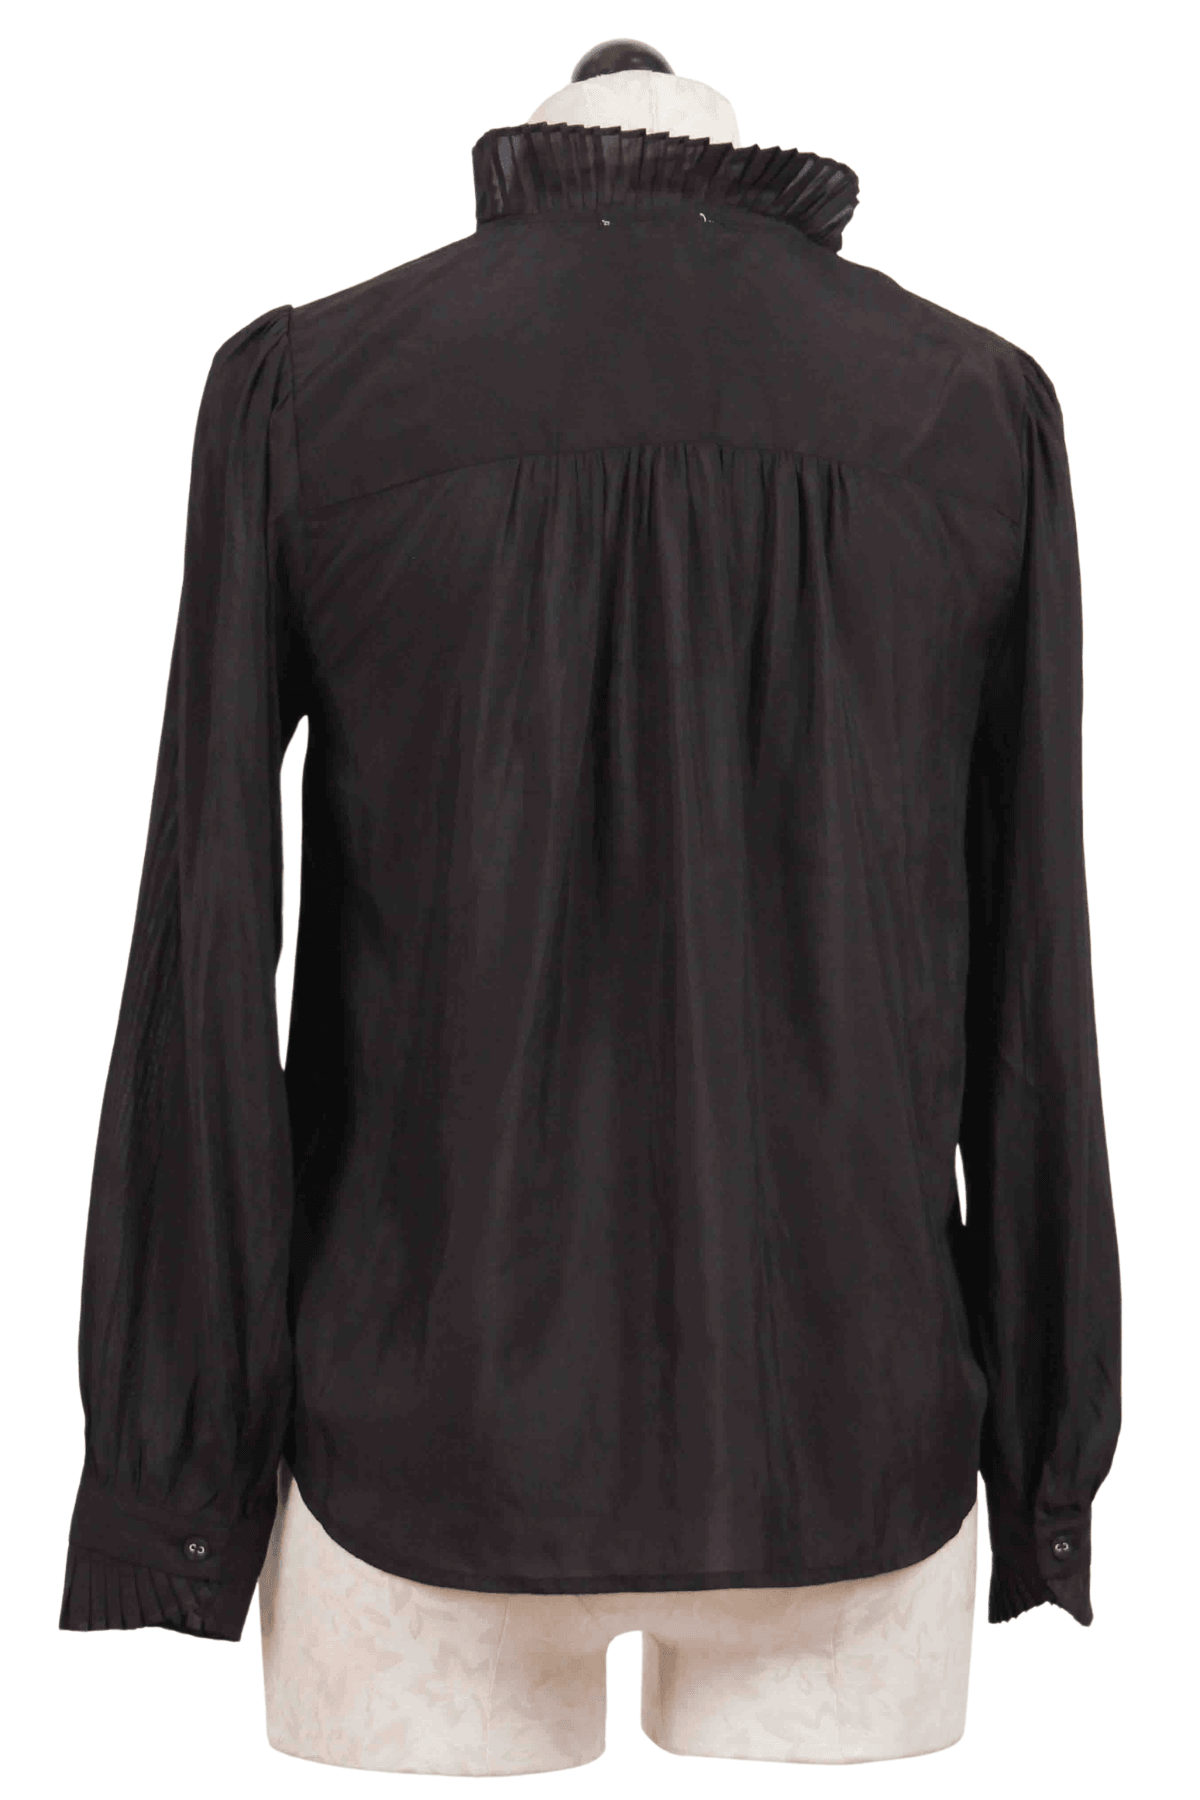 back view of Black Pleated Collar Blouse by The Korner